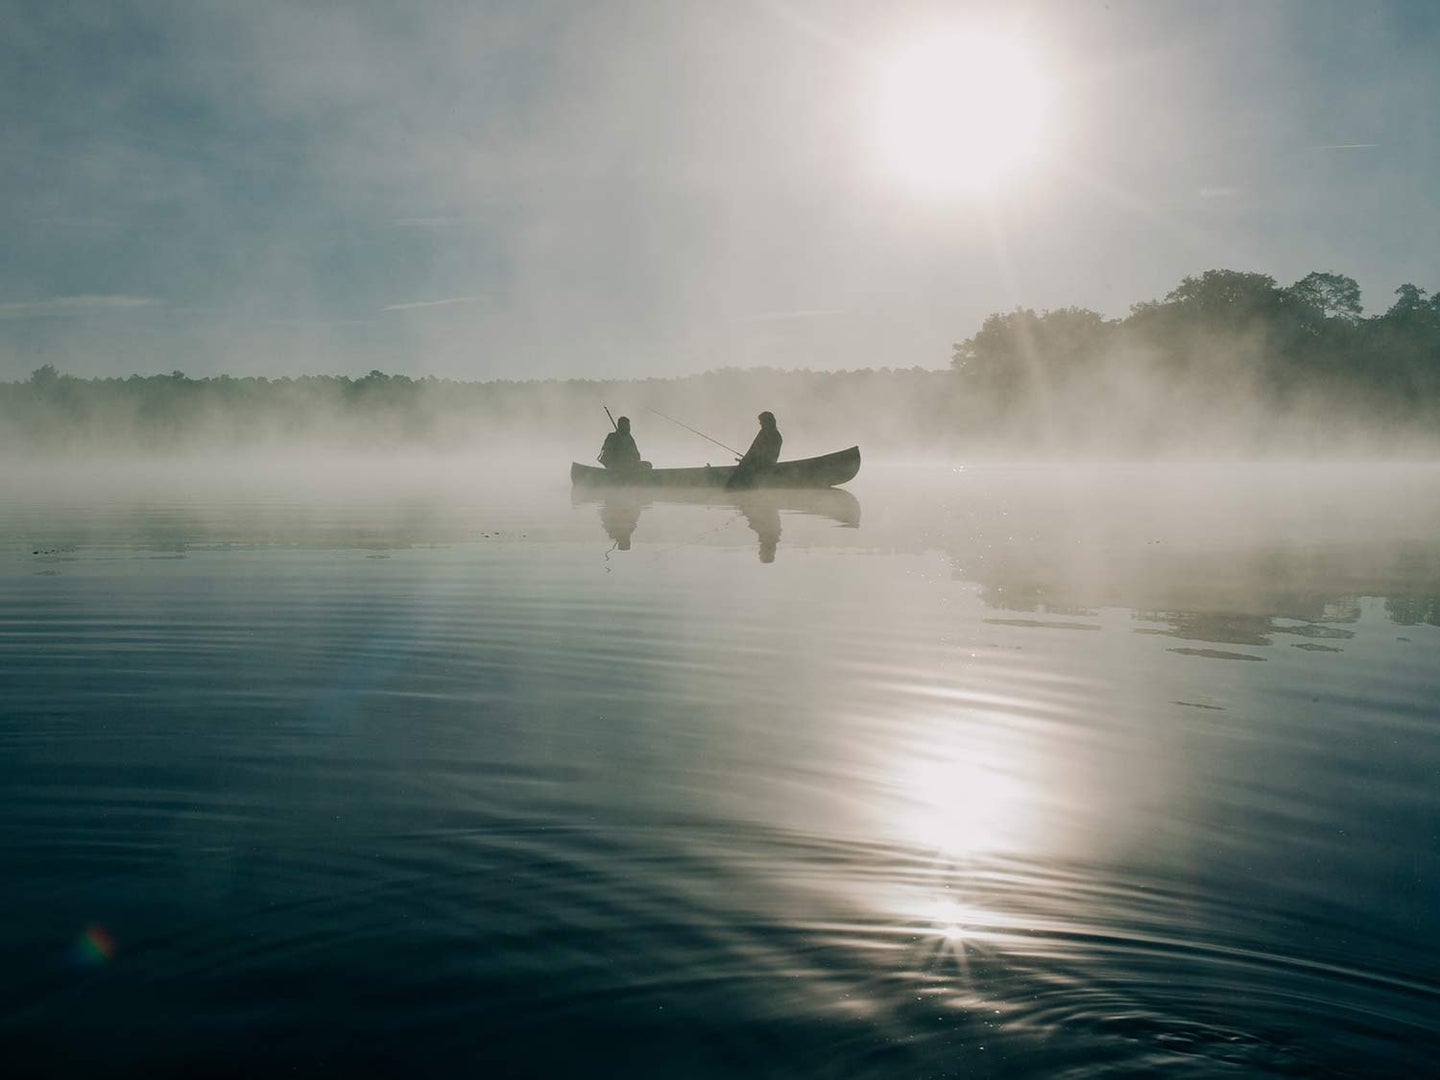 Two anglers sit and fish on a canoe in the middle of a morning sunrise, with fog rising off the smooth surface of the lake.